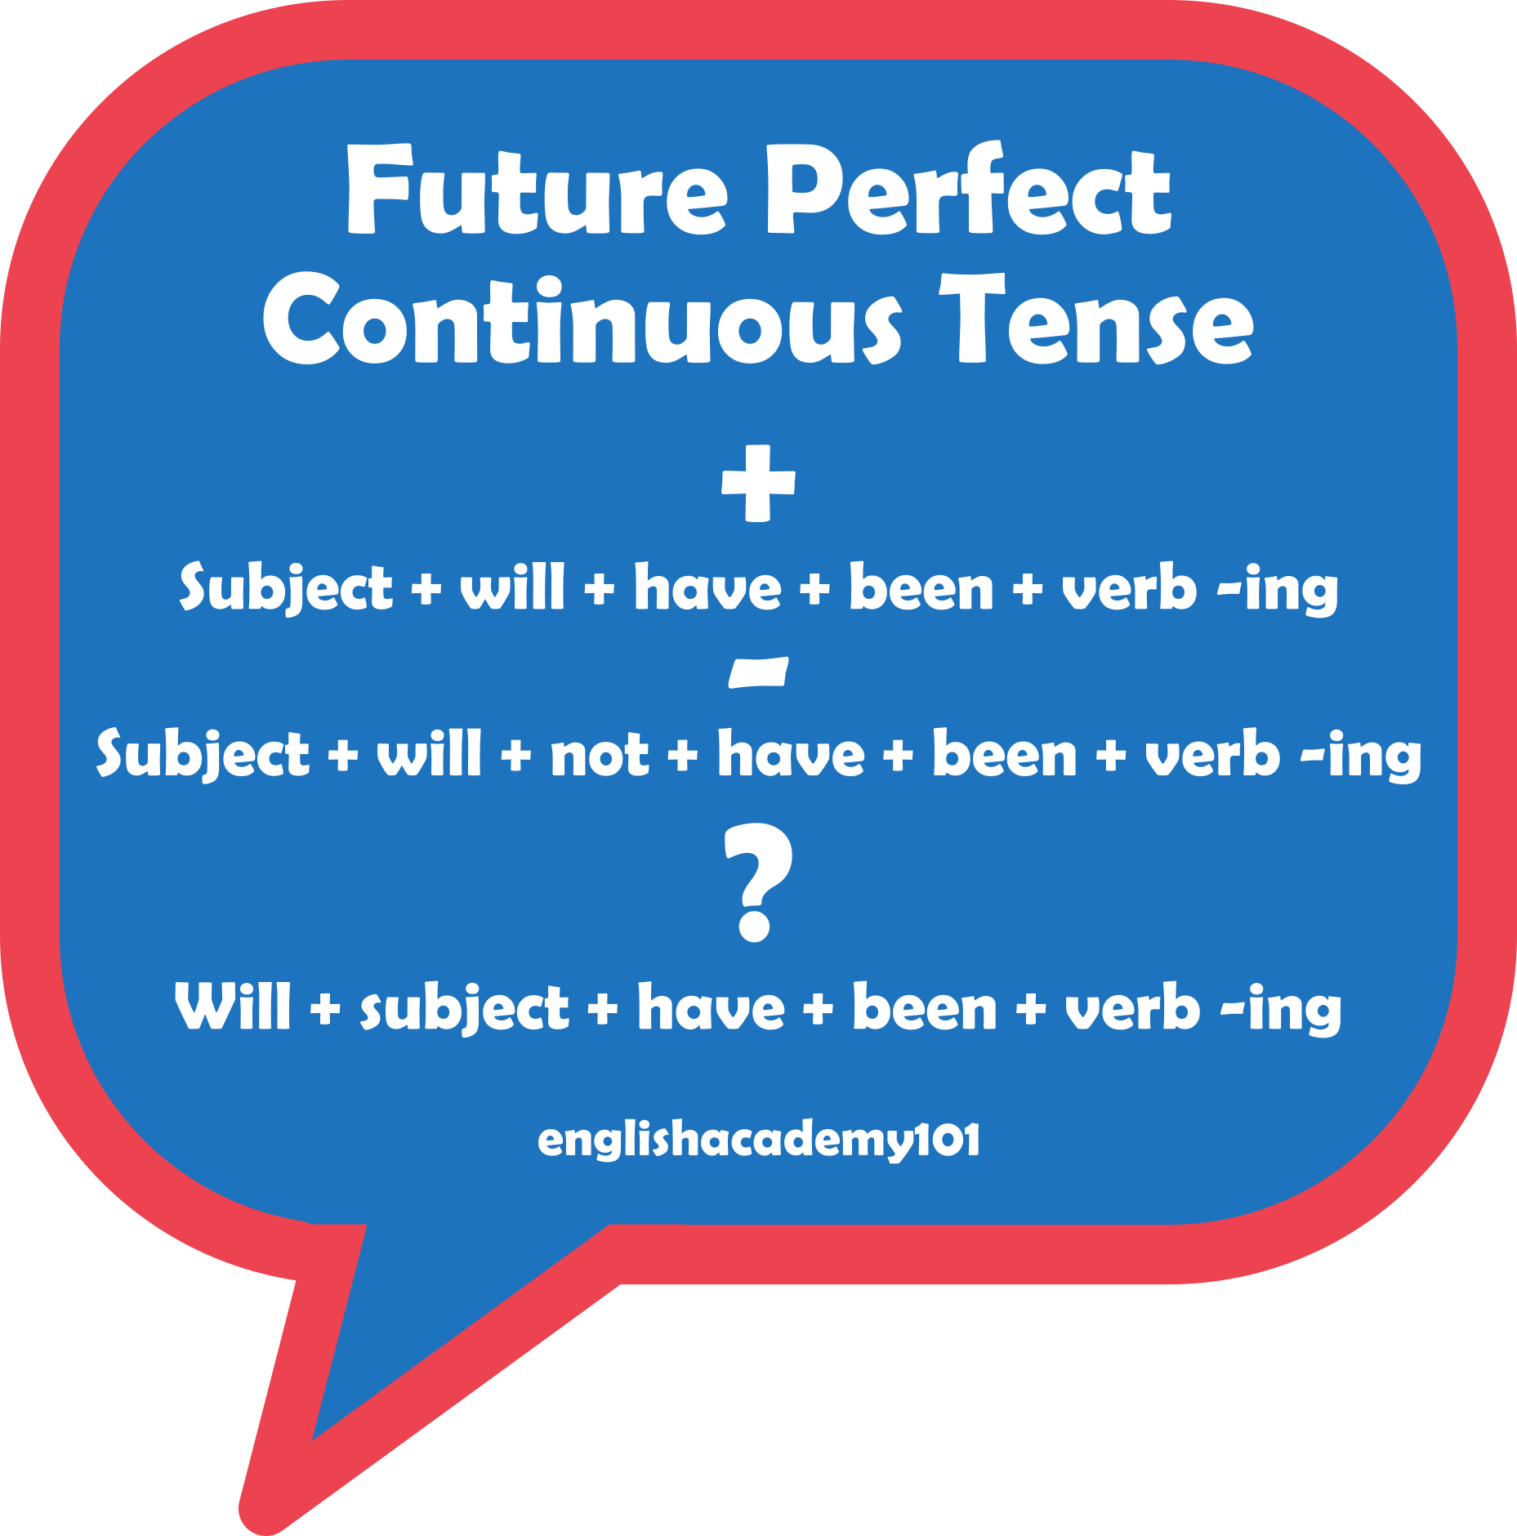 future-perfect-continuous-tense-archives-englishacademy101